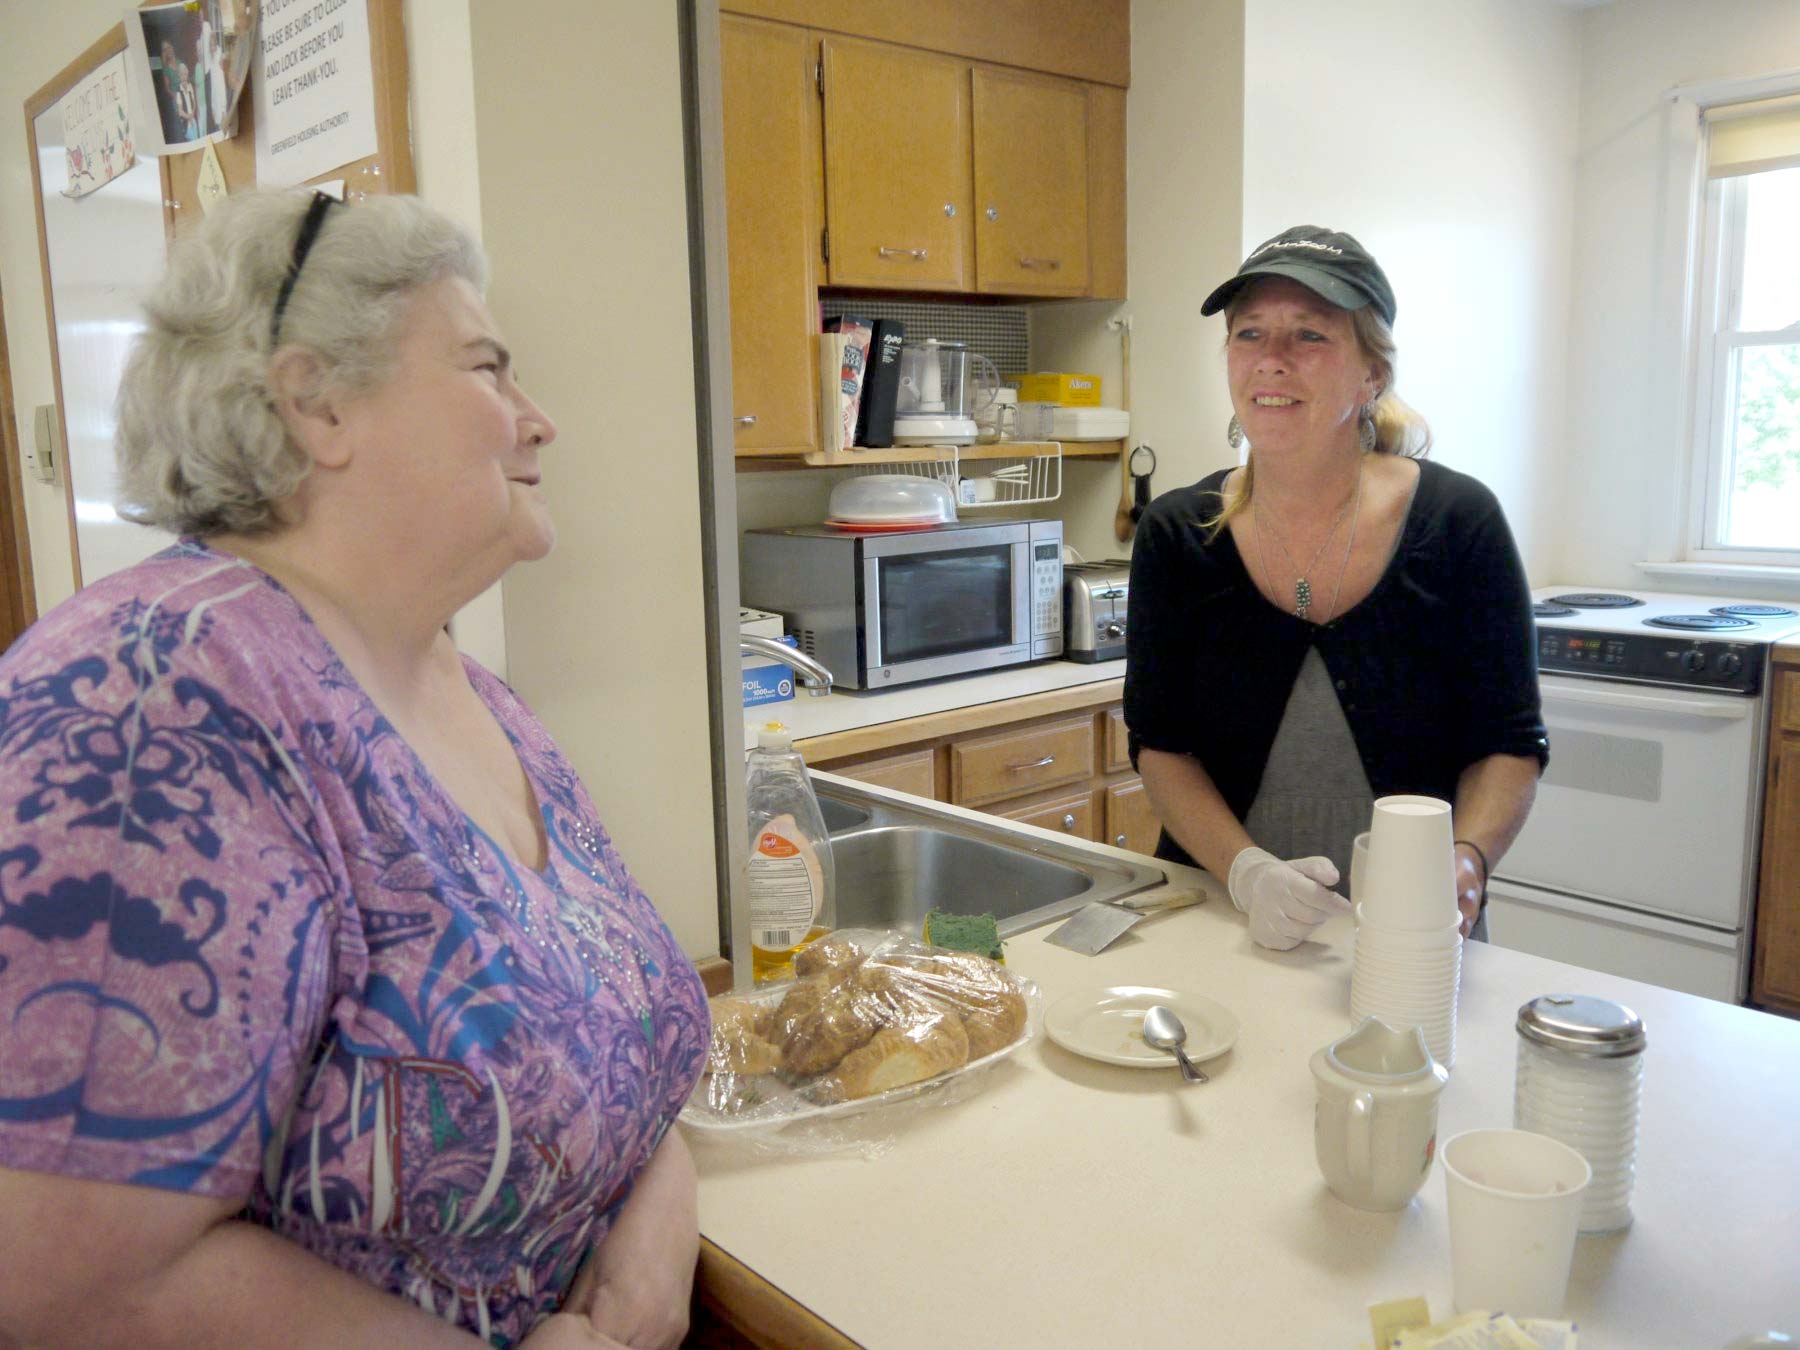 Two women in a communal kitchen smiling.